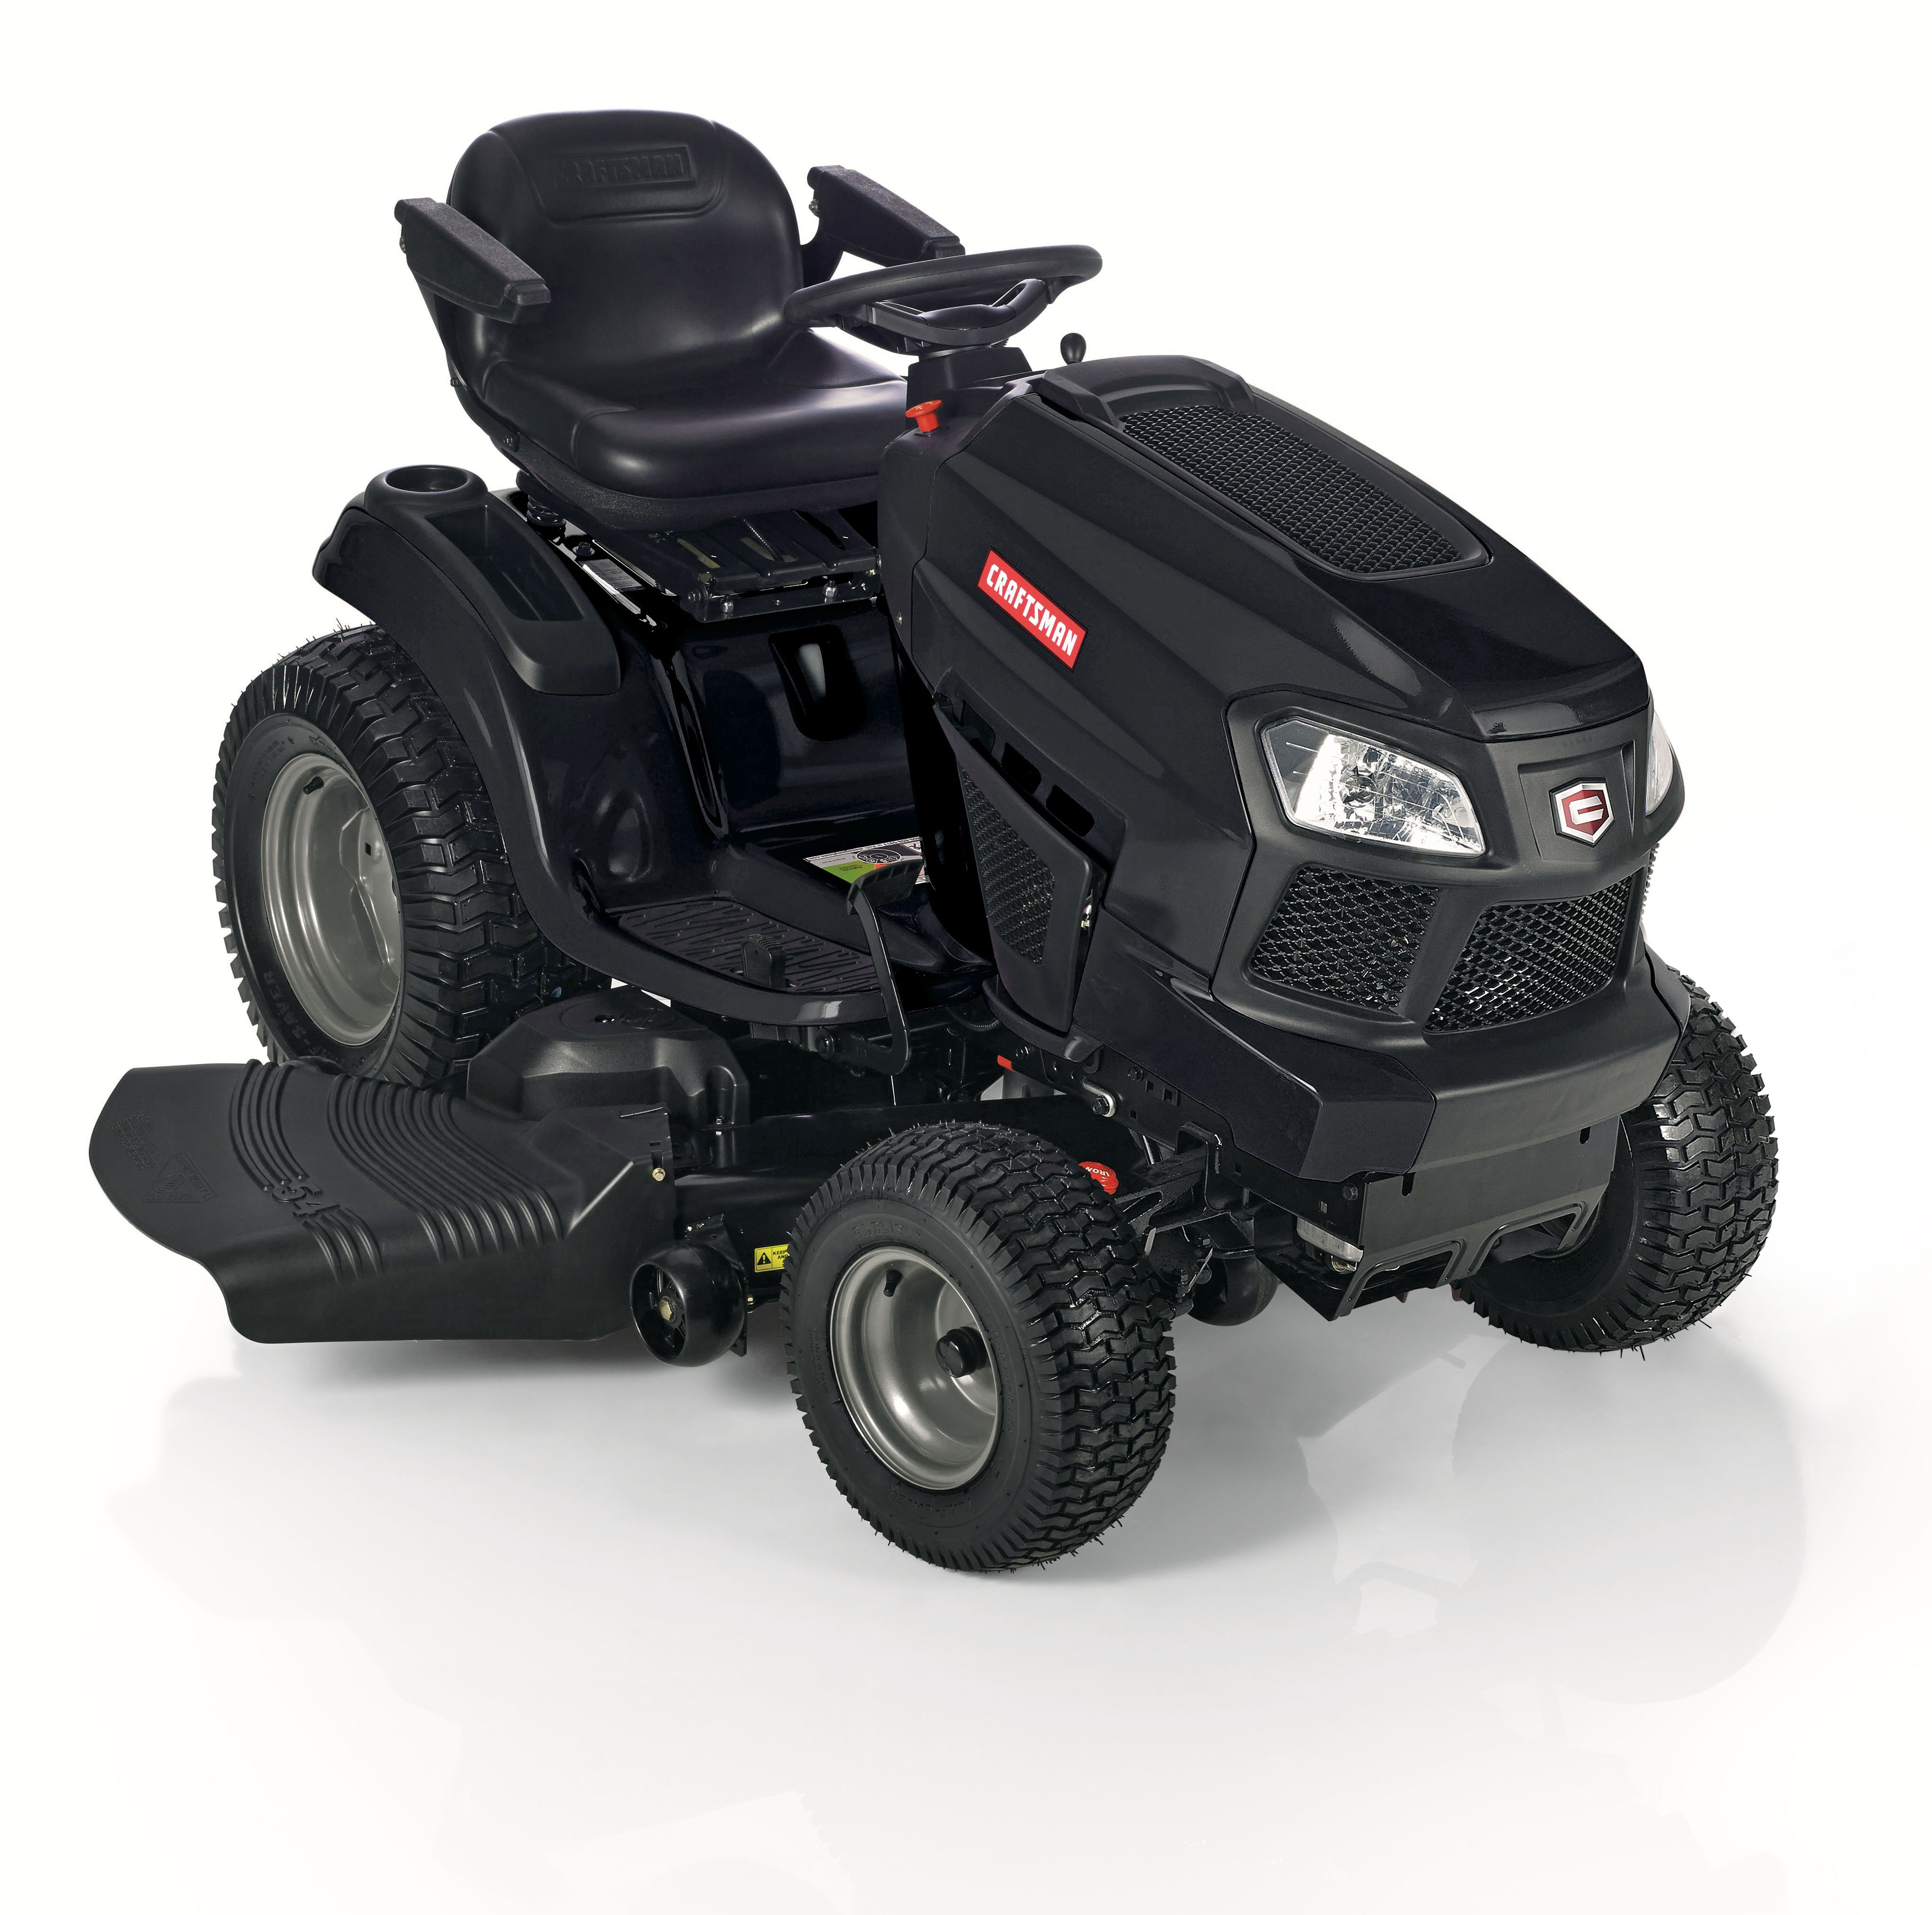 Craftsman 10110 54" 24HP Riding Lawn Tractor